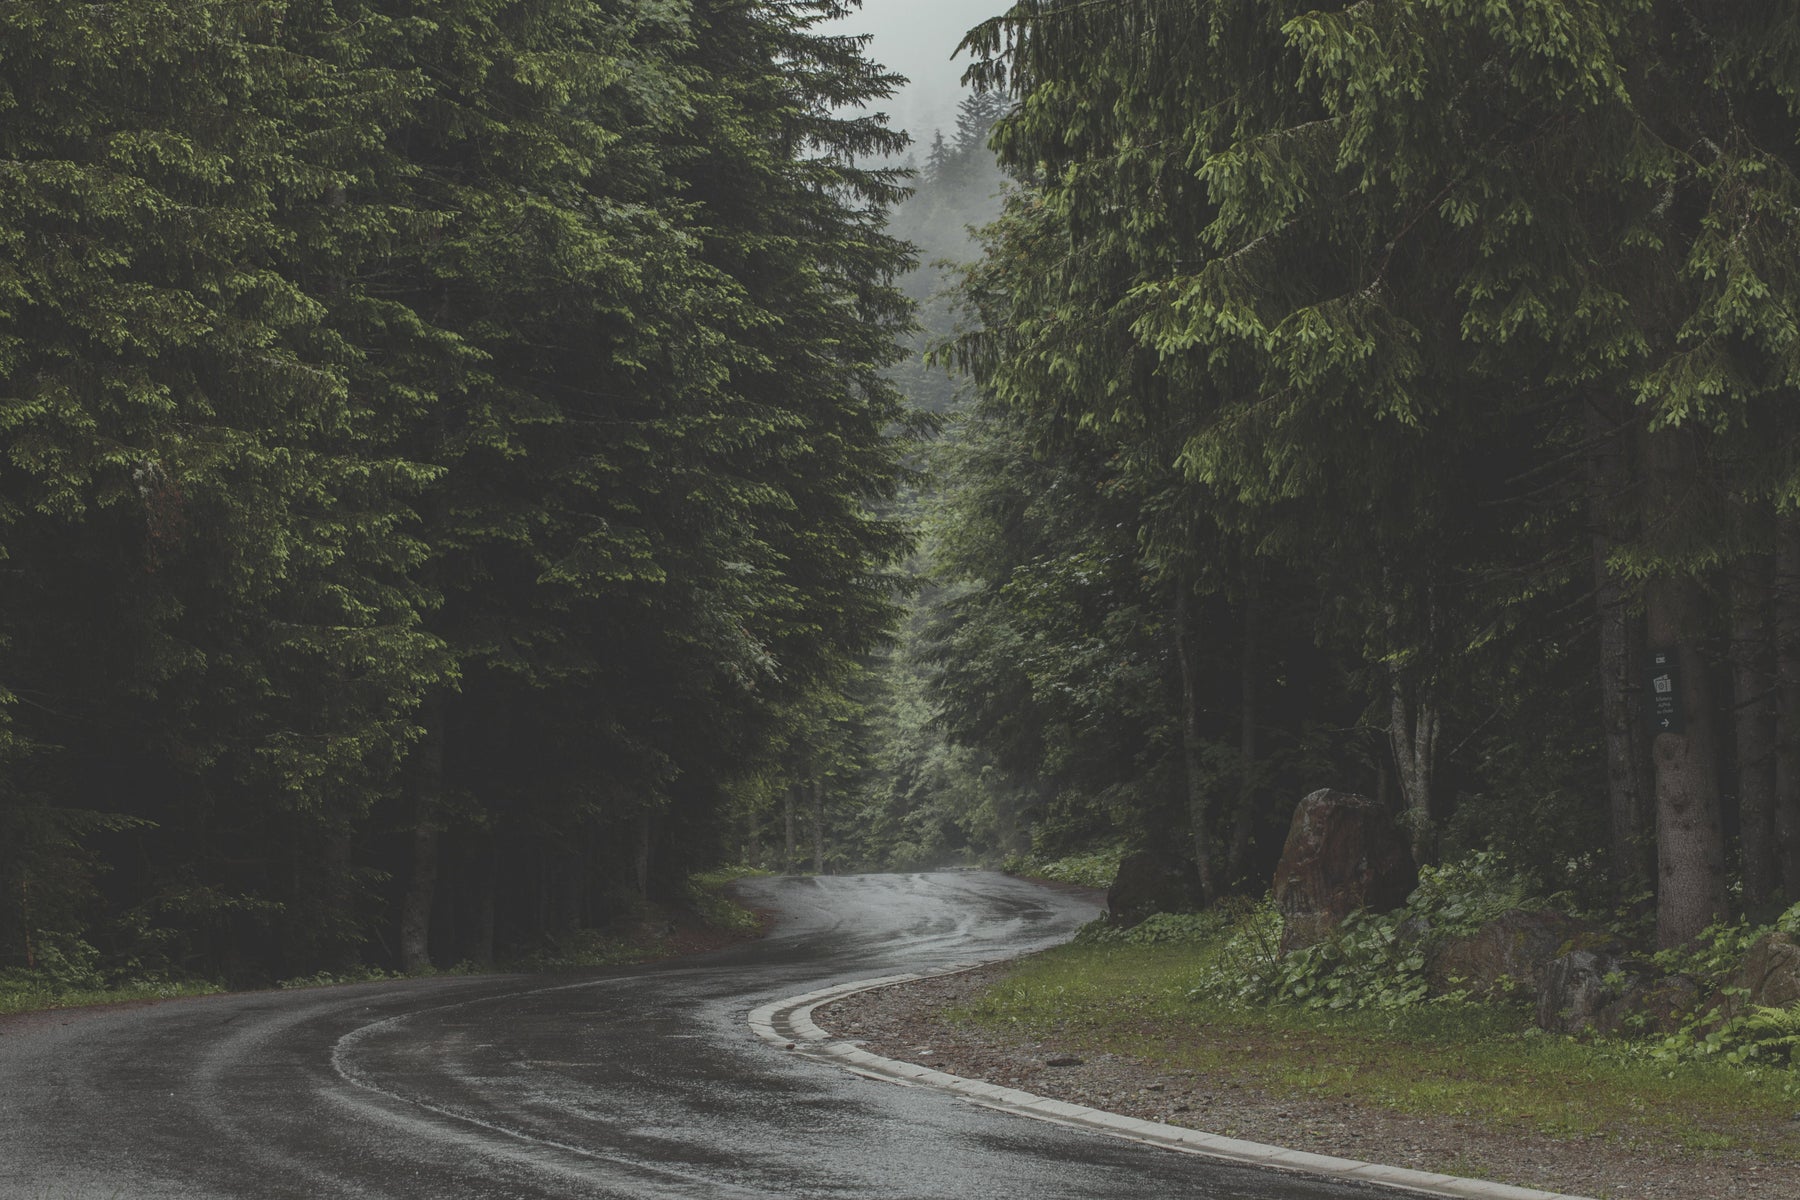 wet curvy road winding through a pine tree forest